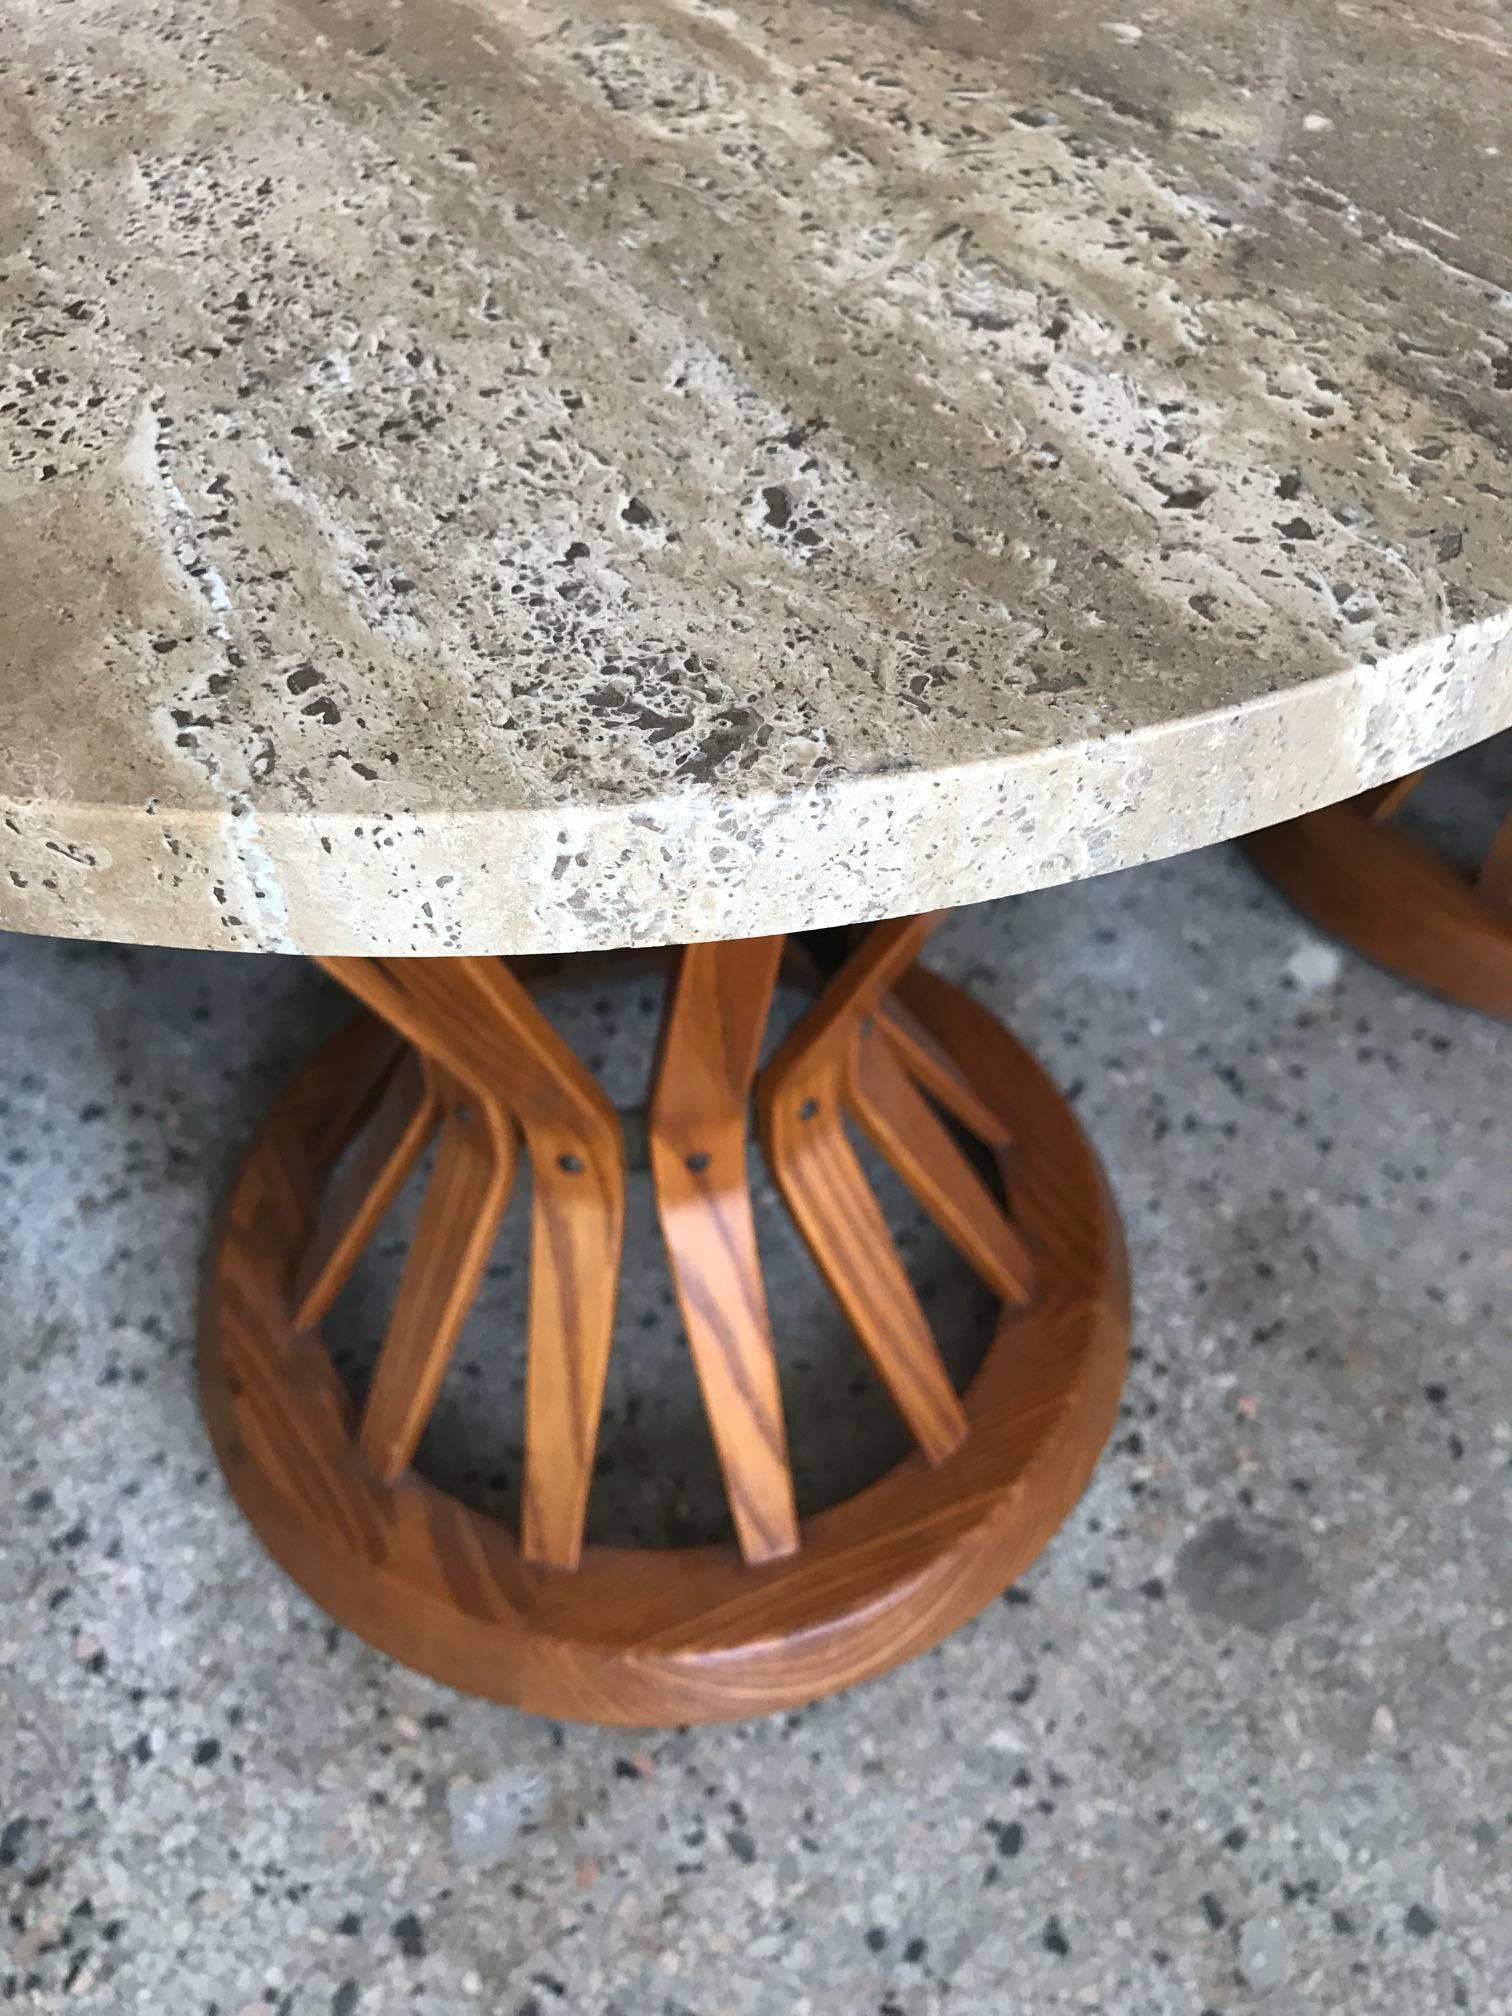 A pair of fine Edward Wormley for Dunbar occasional tables with travertine marble tops. Ash frames in very good original condition. Travertine marble from Carrara, Italy has no issues, beautiful graining. Both have Dunbar labels. Could be pedestals,